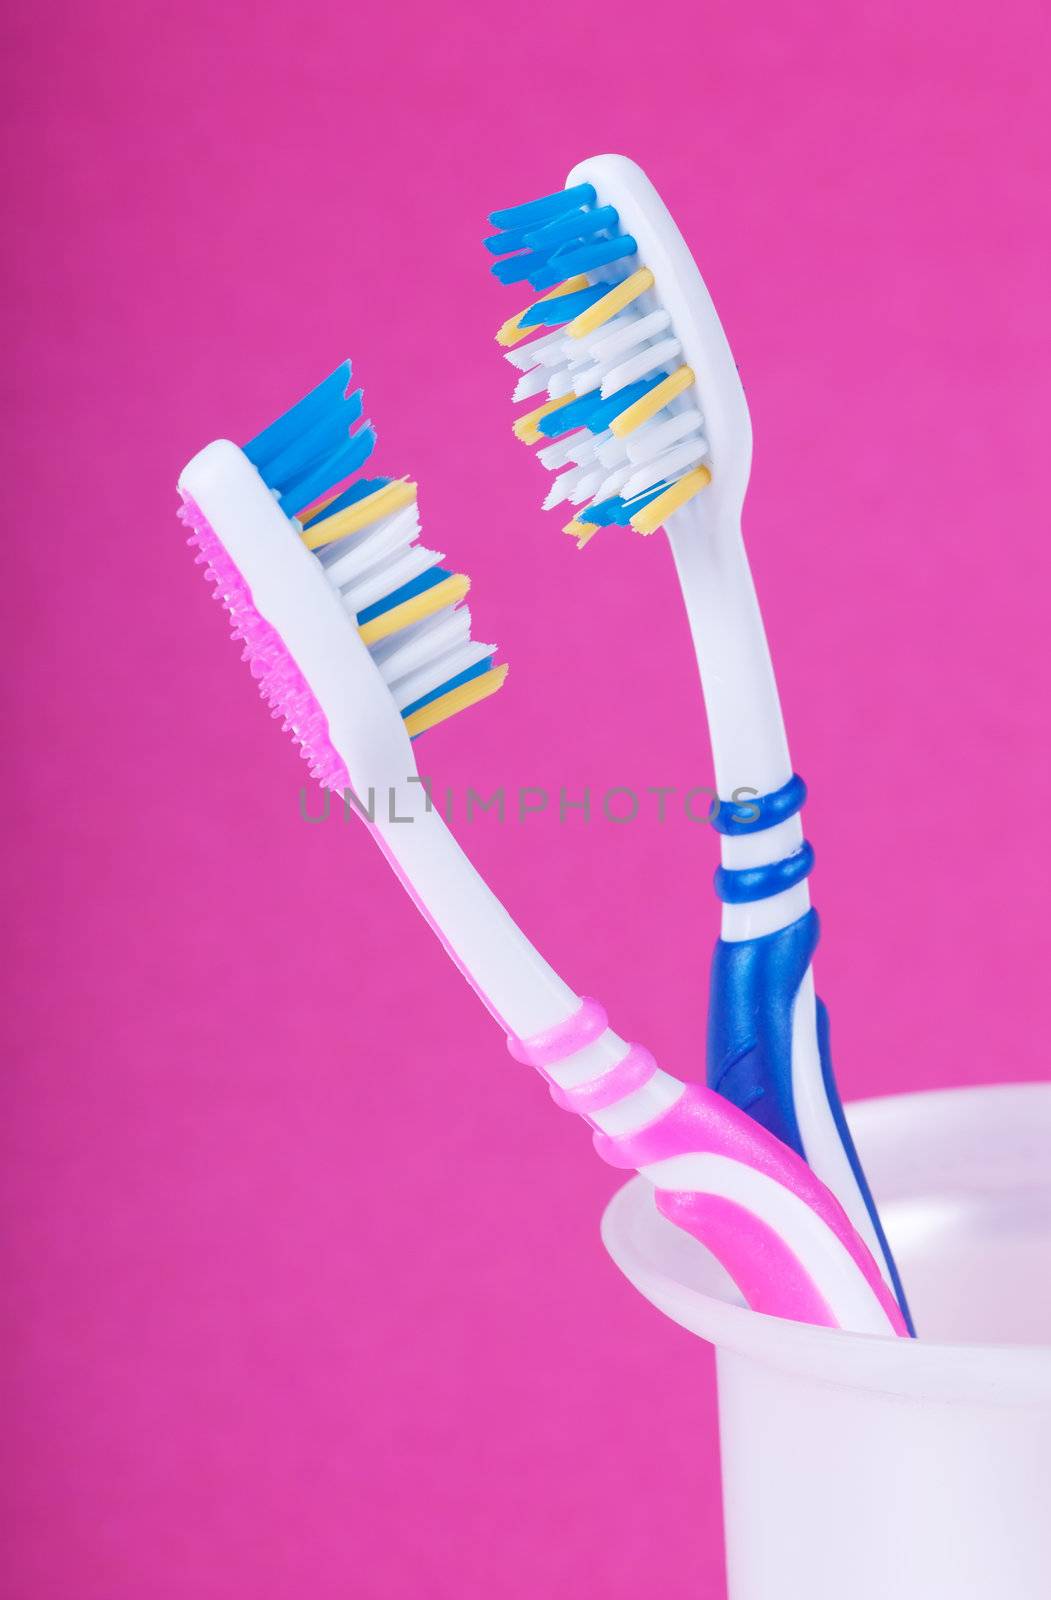 Toothbrushes by AGorohov